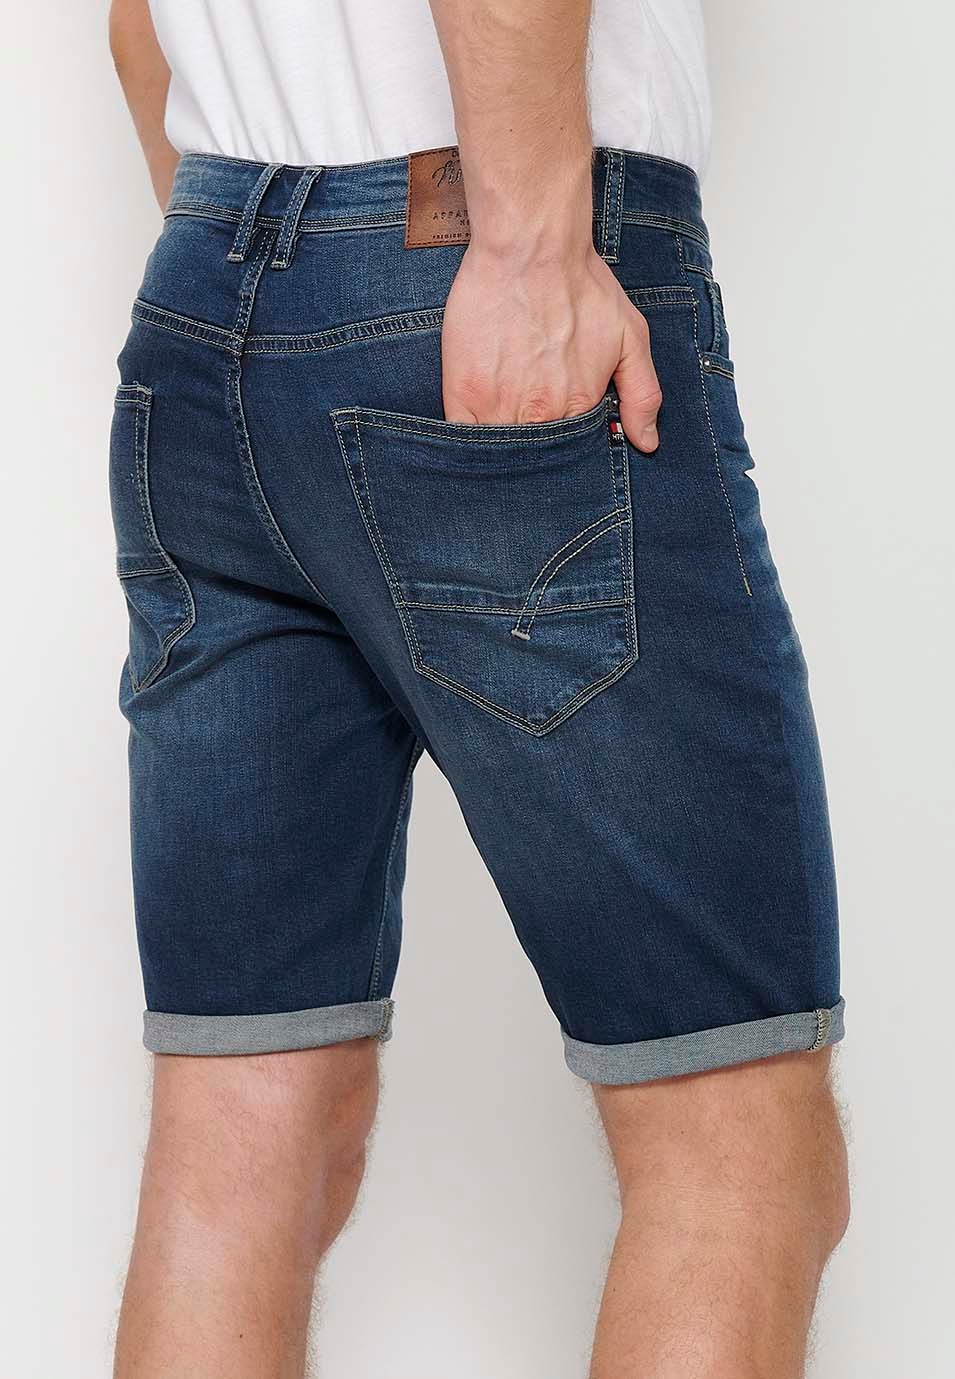 Blue Denim Bermuda Shorts with Turn-Up Finish and Front Zipper and Button Closure for Men 1